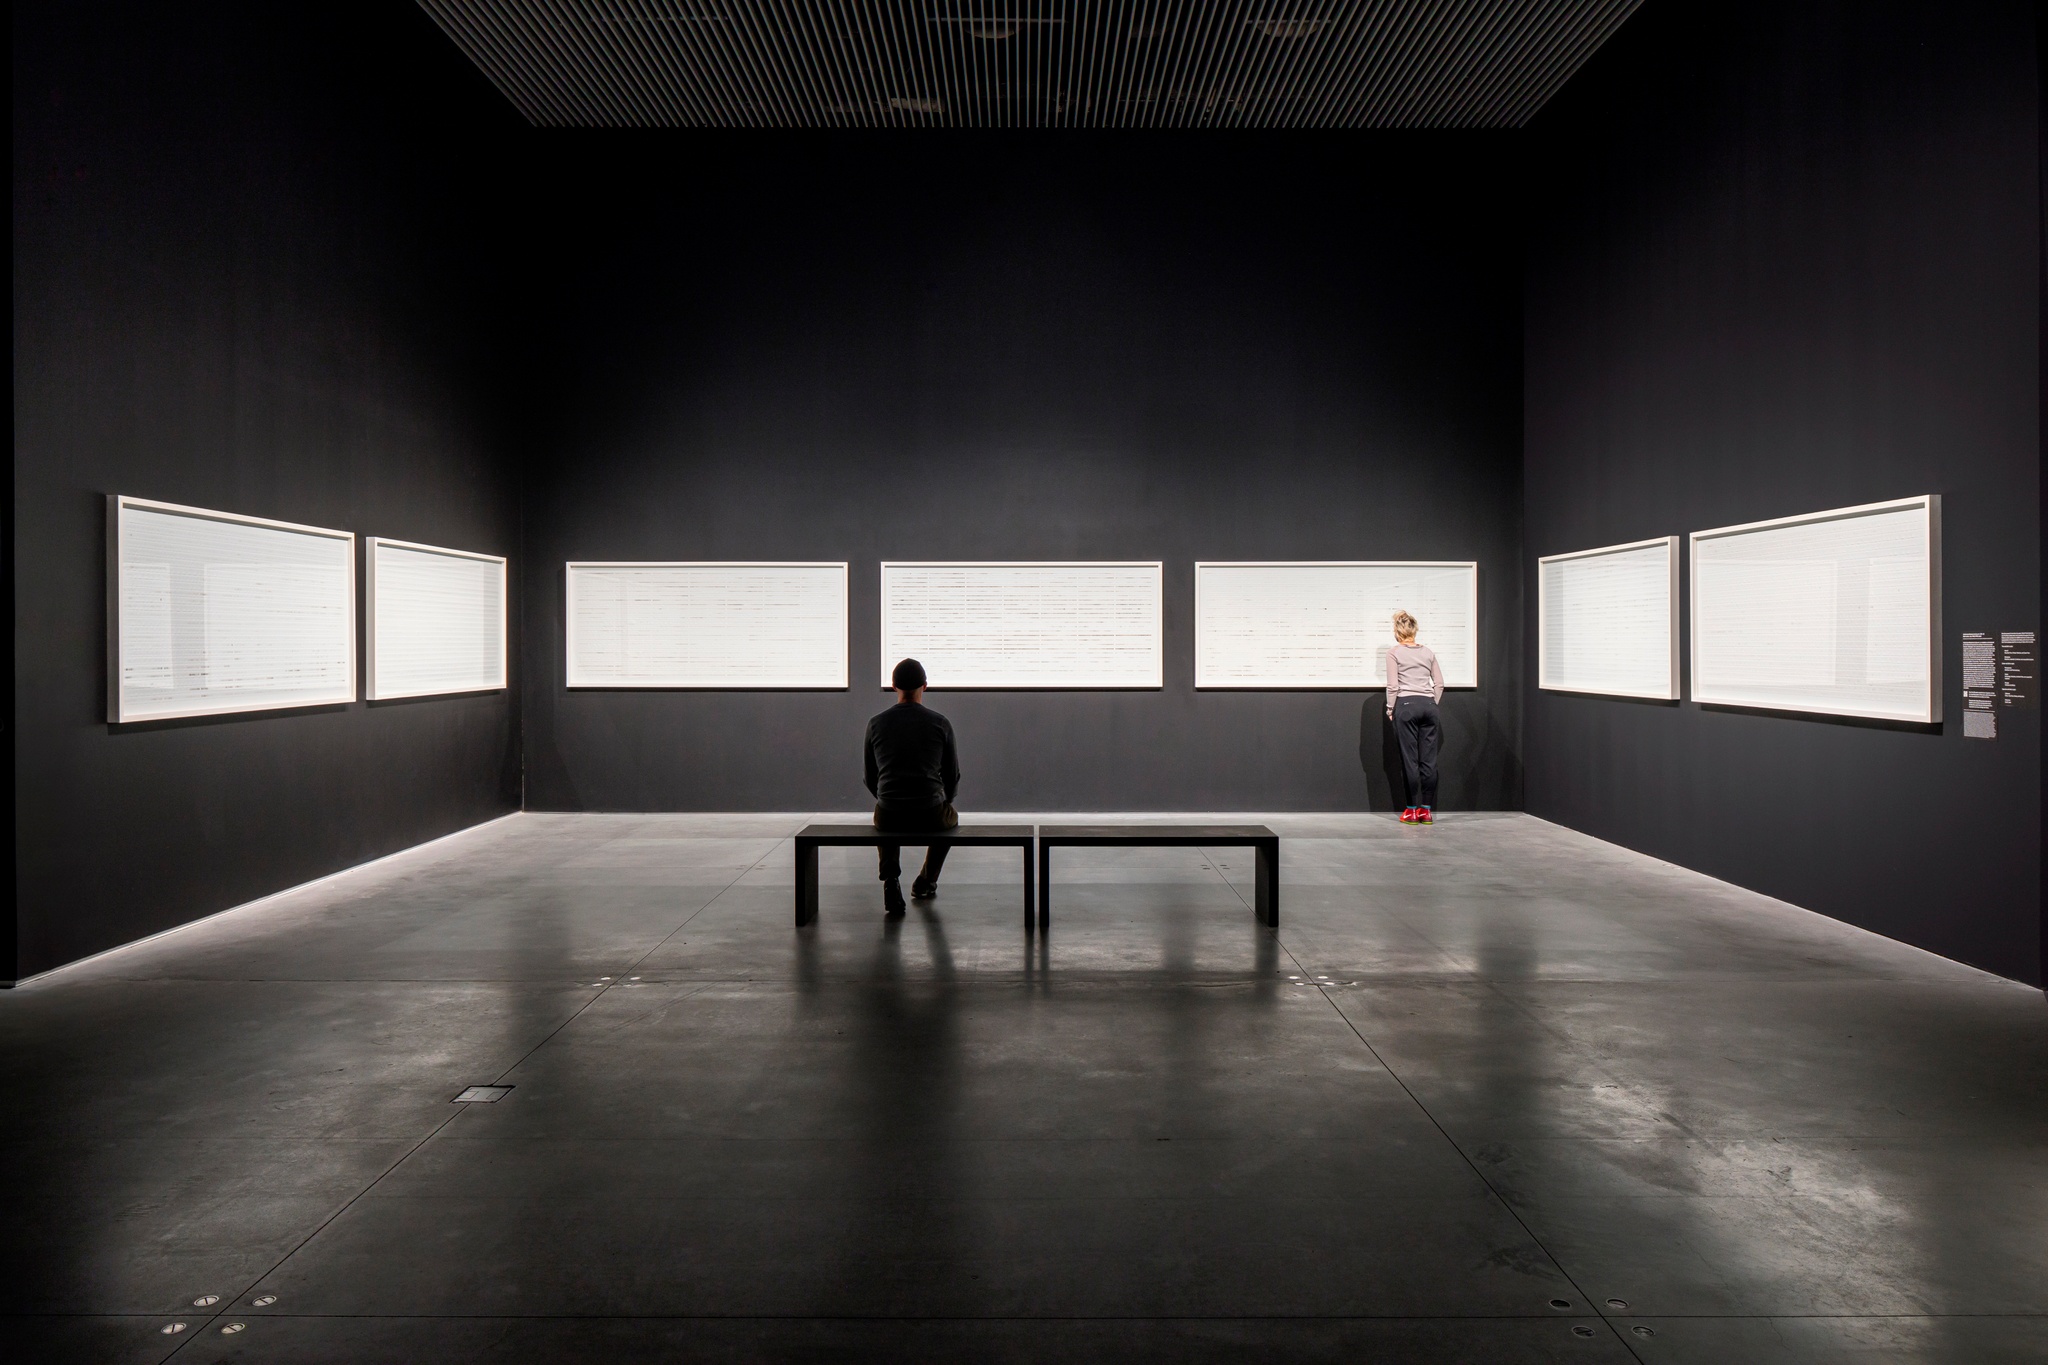 Seven large horizontal frames line three walls of a gallery space. A person sits on a bench centered in front of them and another person stands close to one frame on the left, examining its contents.